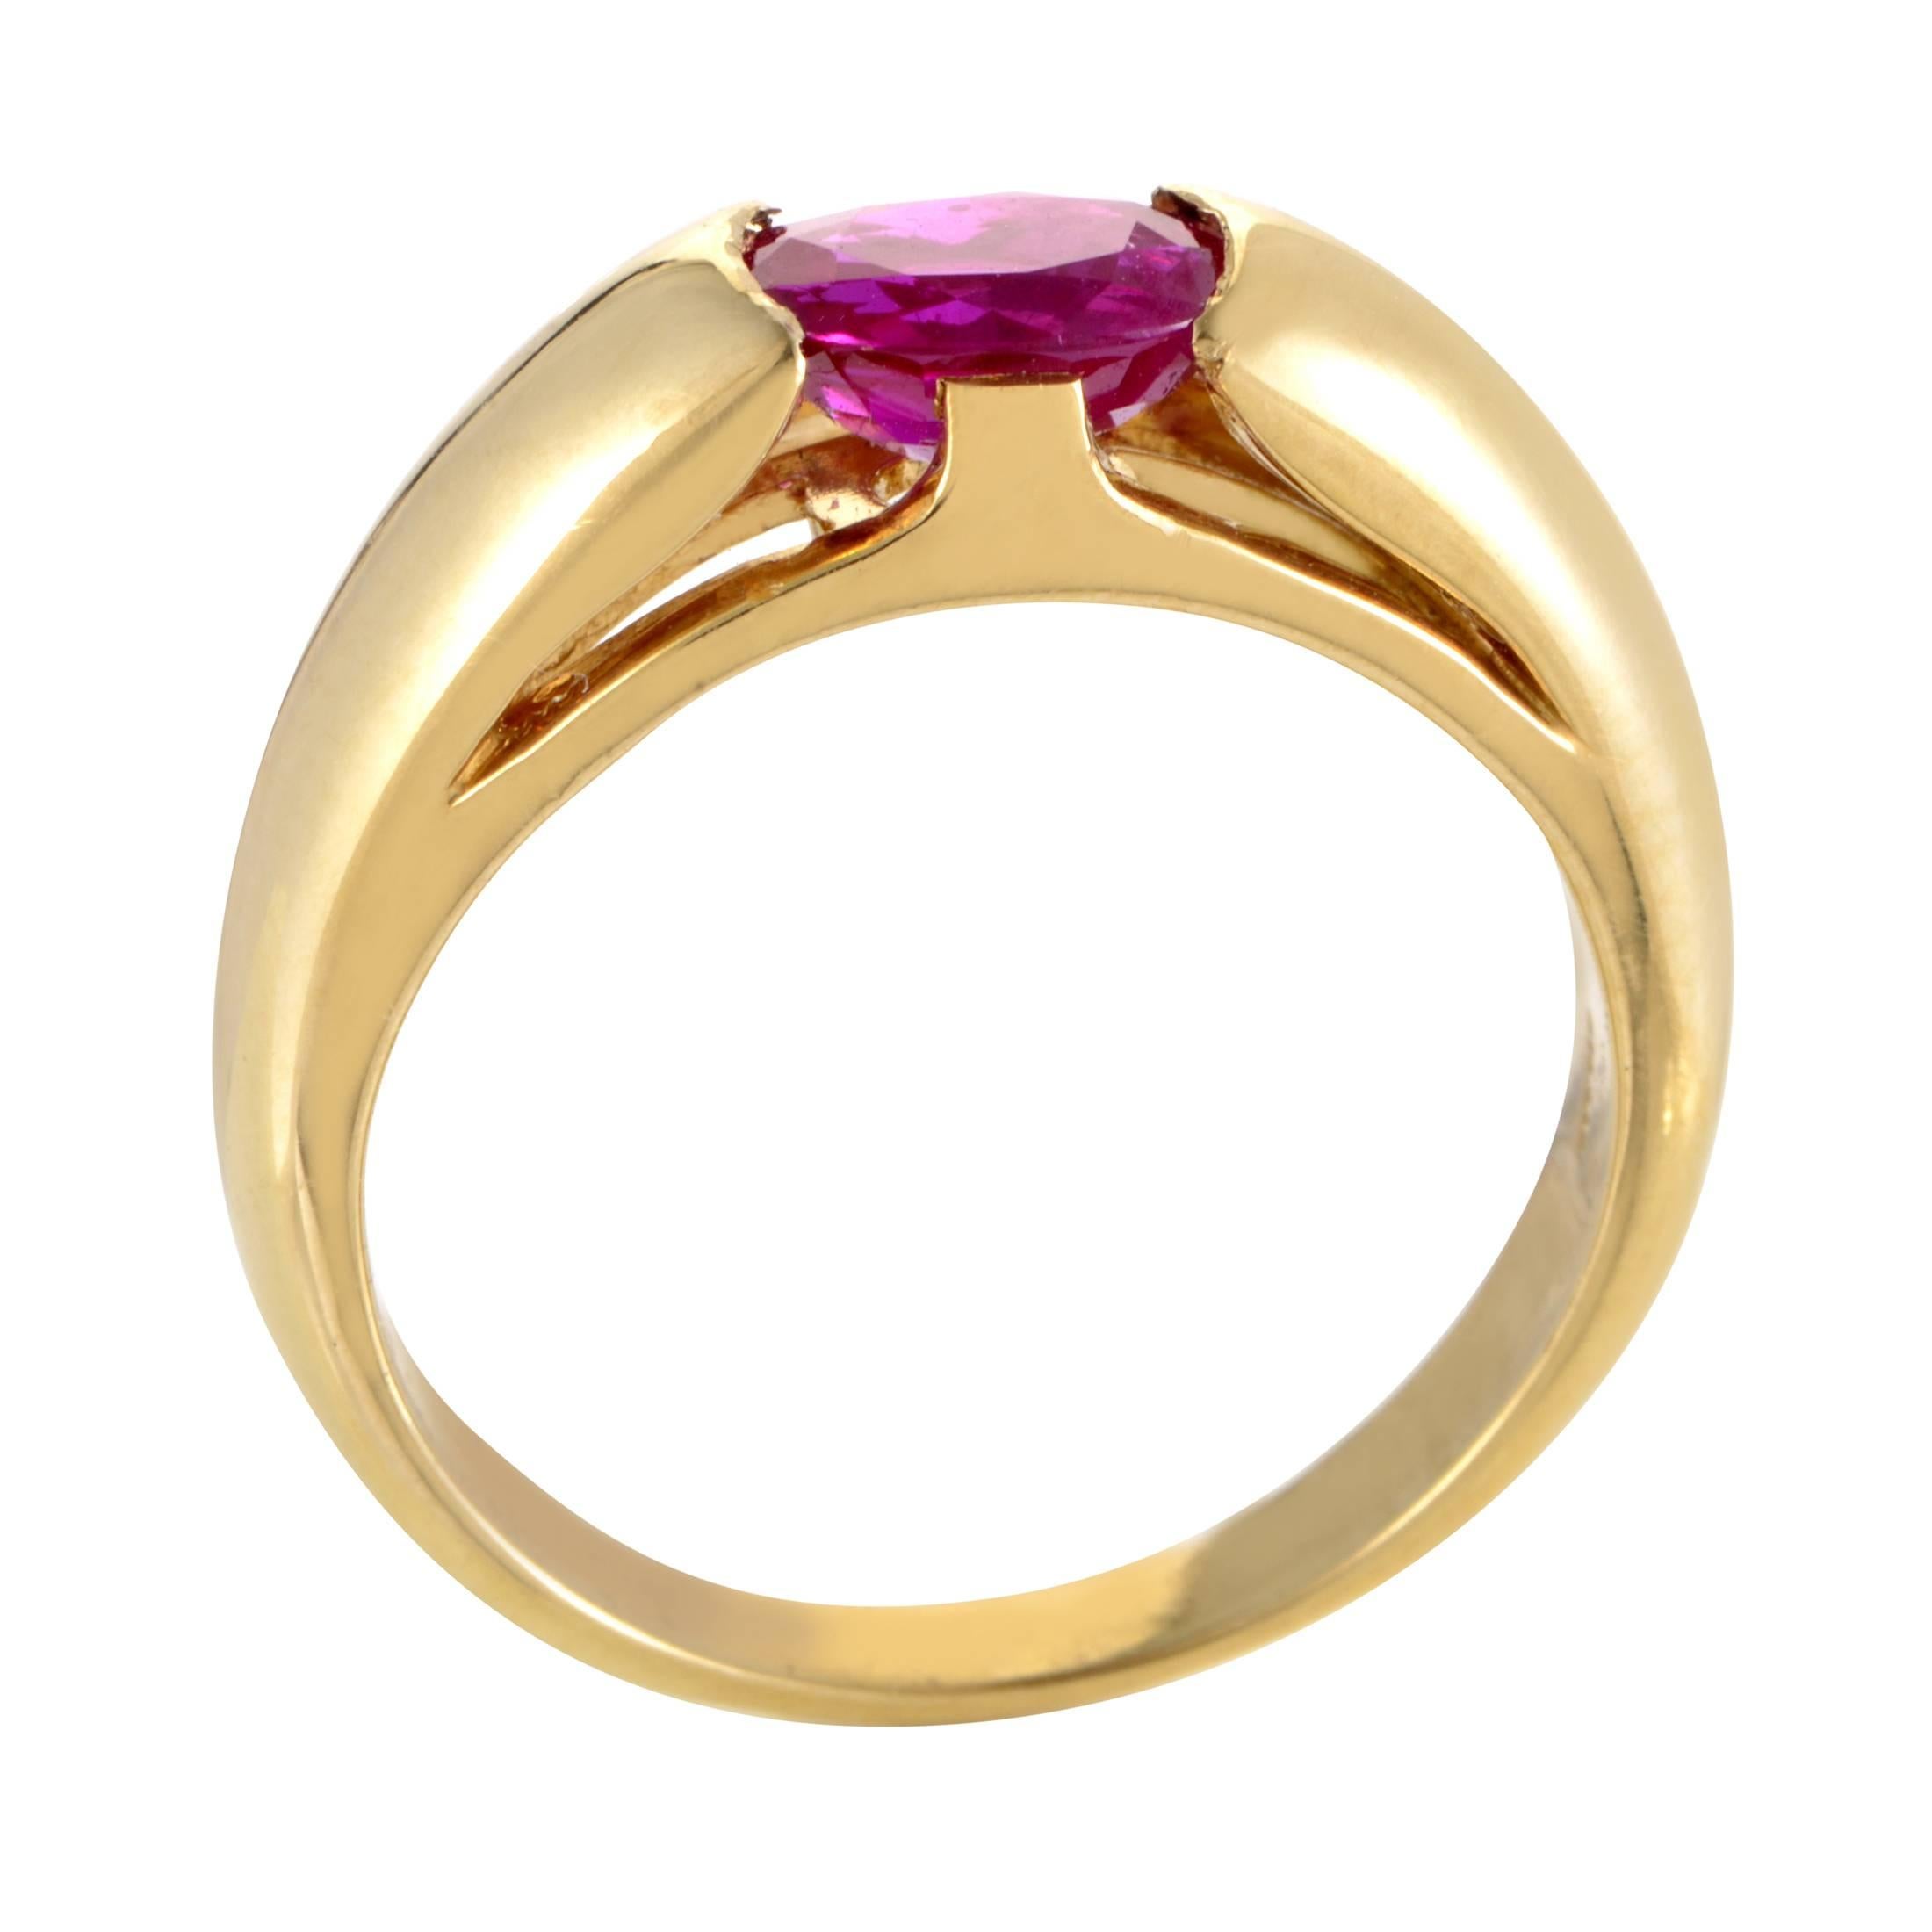 Exuding sophisticated elegance and prestigious excellence through its gracefully smooth shape and immaculate finish, this stunning ring from Bulgari is made of radiant 18K yellow gold and adorned with a charming ruby weighing approximately 1.50